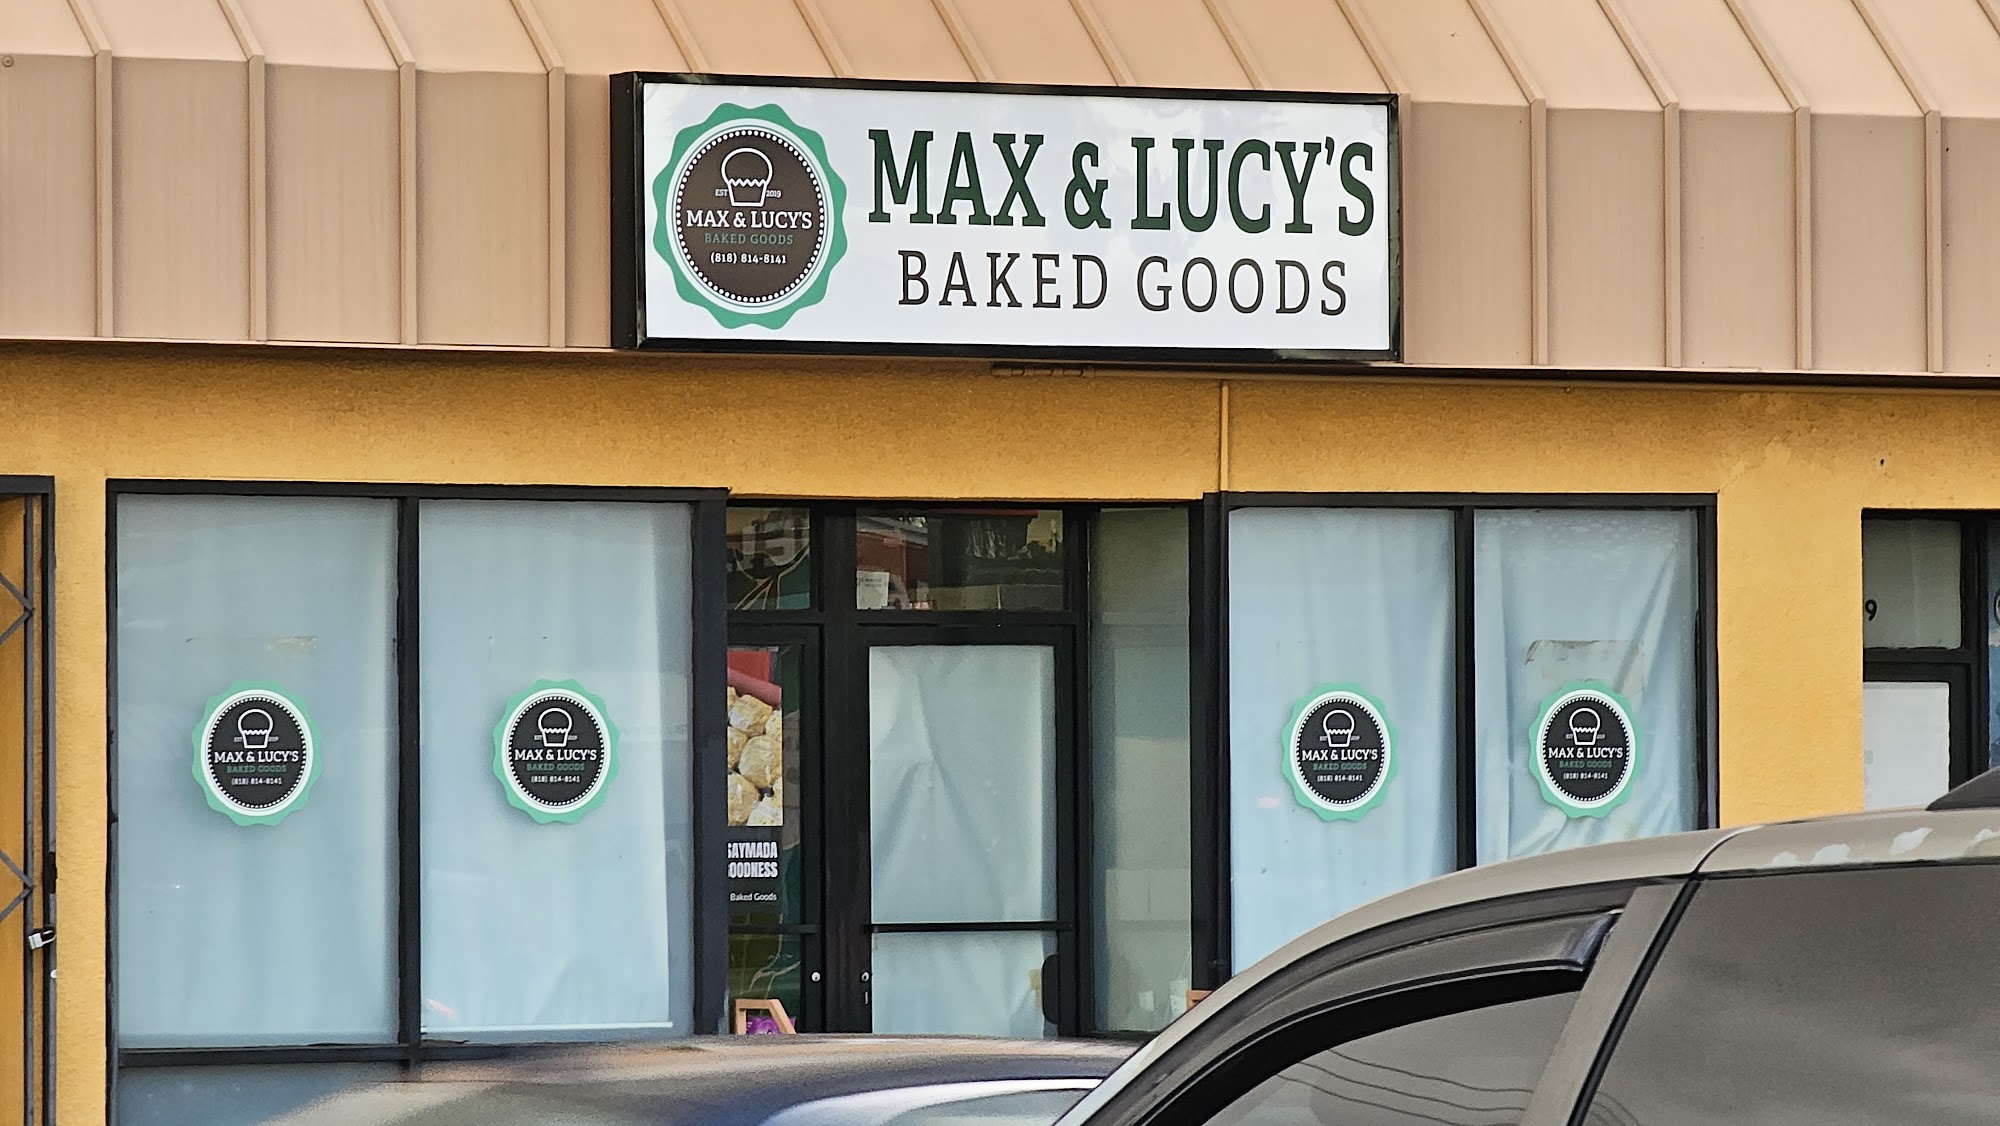 Max & Lucy's Baked Goods